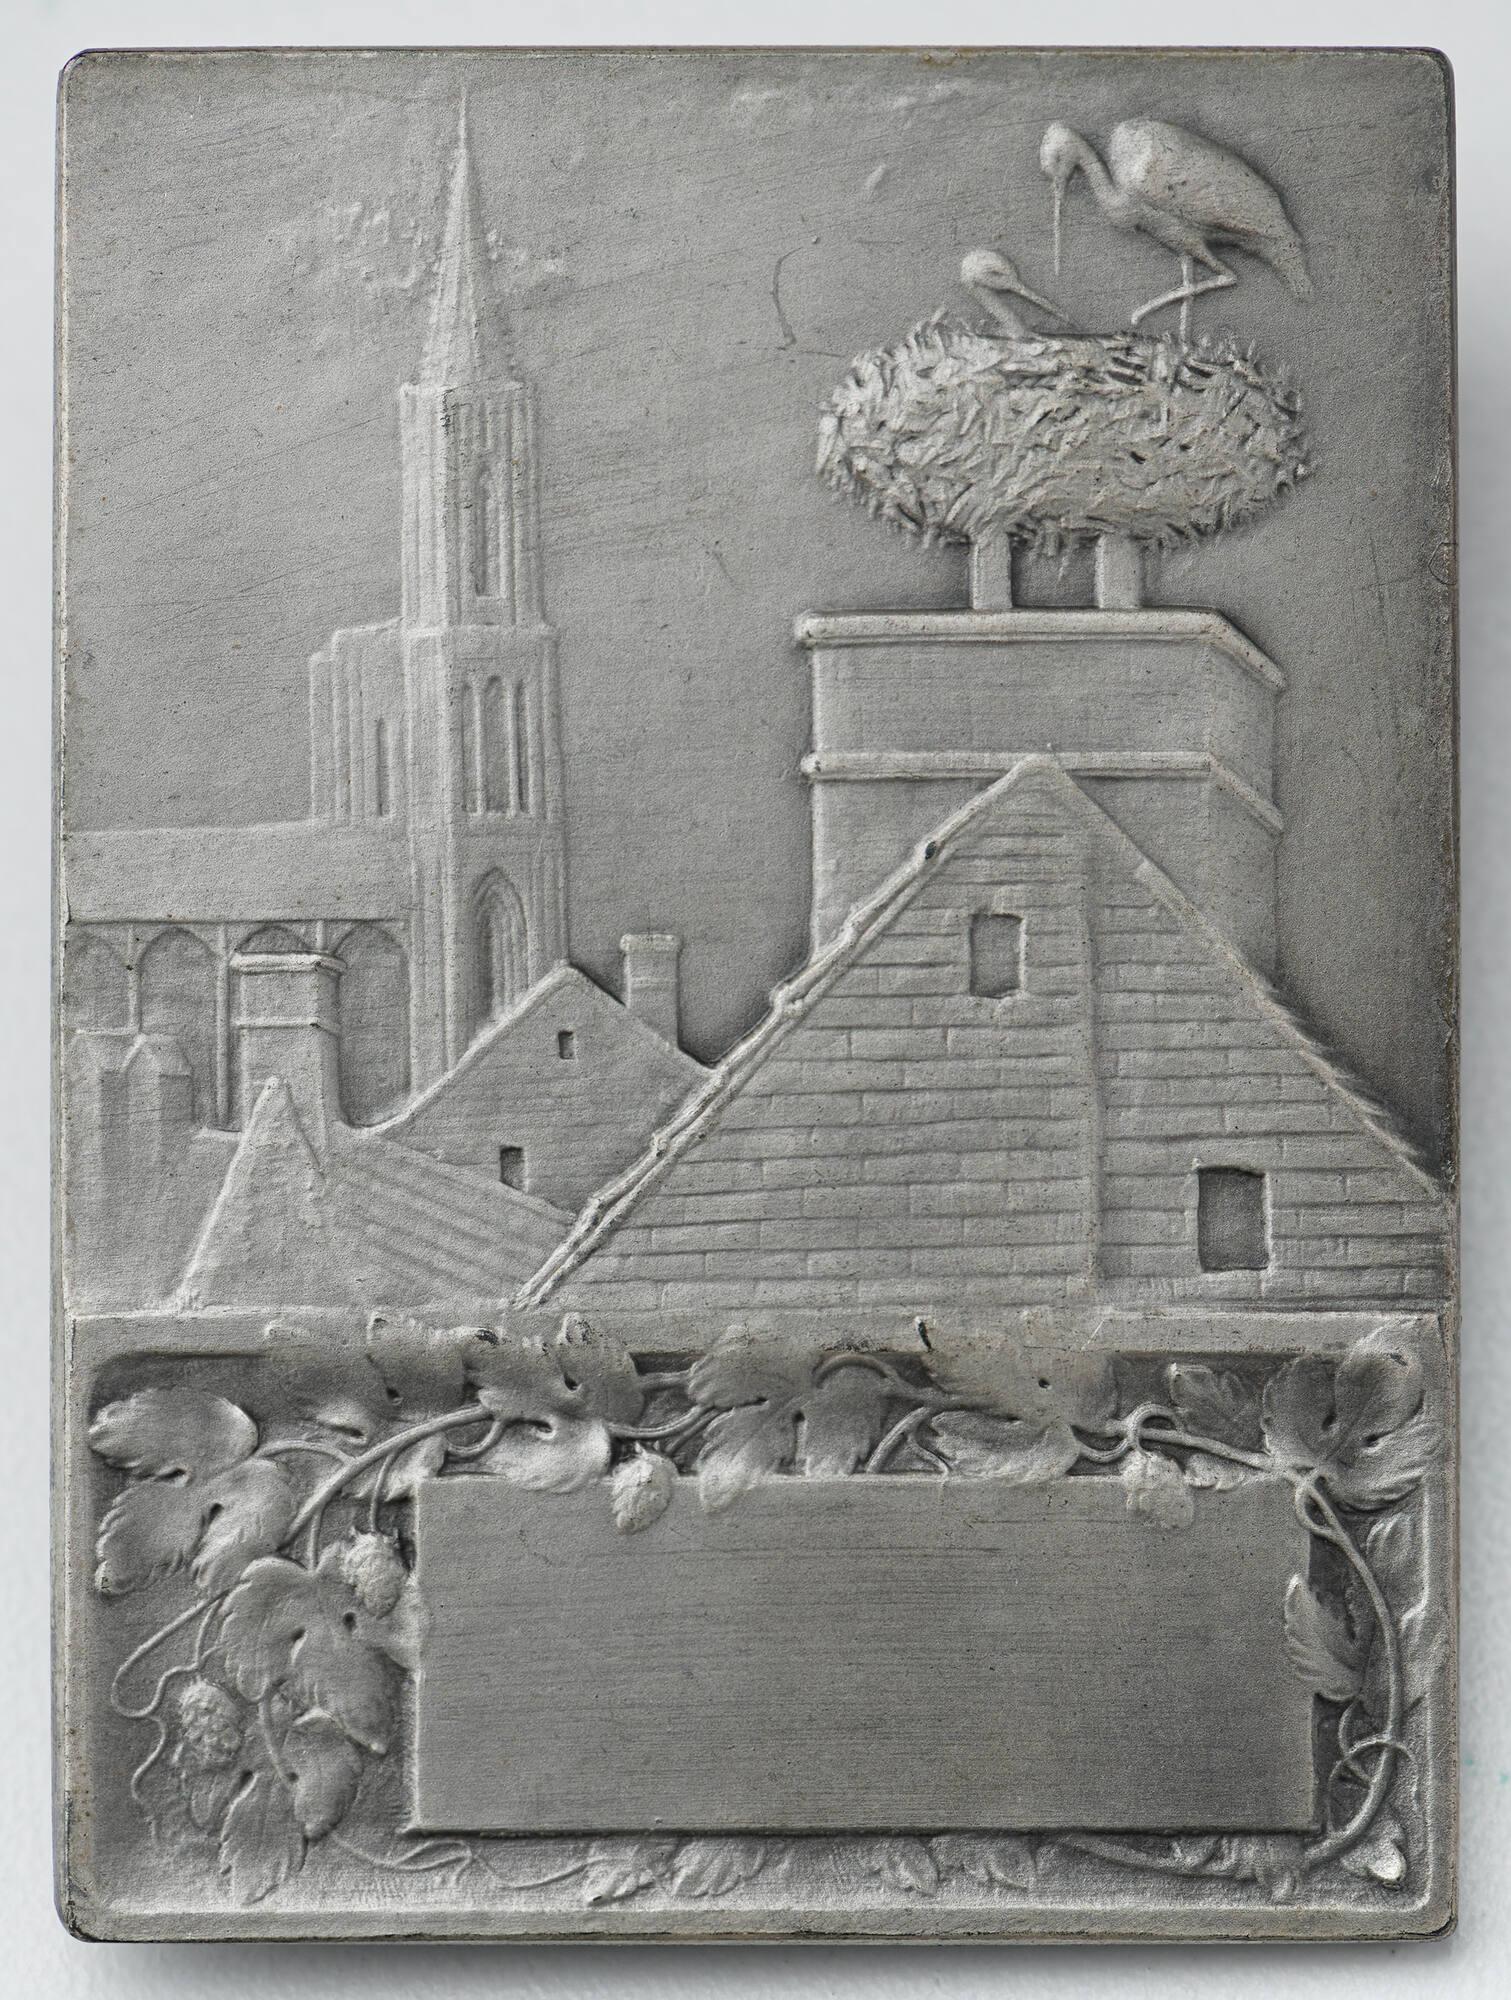 Silver plaquette with a steeple, rooftops, and a stork's nest on top of a chimney in high relief.